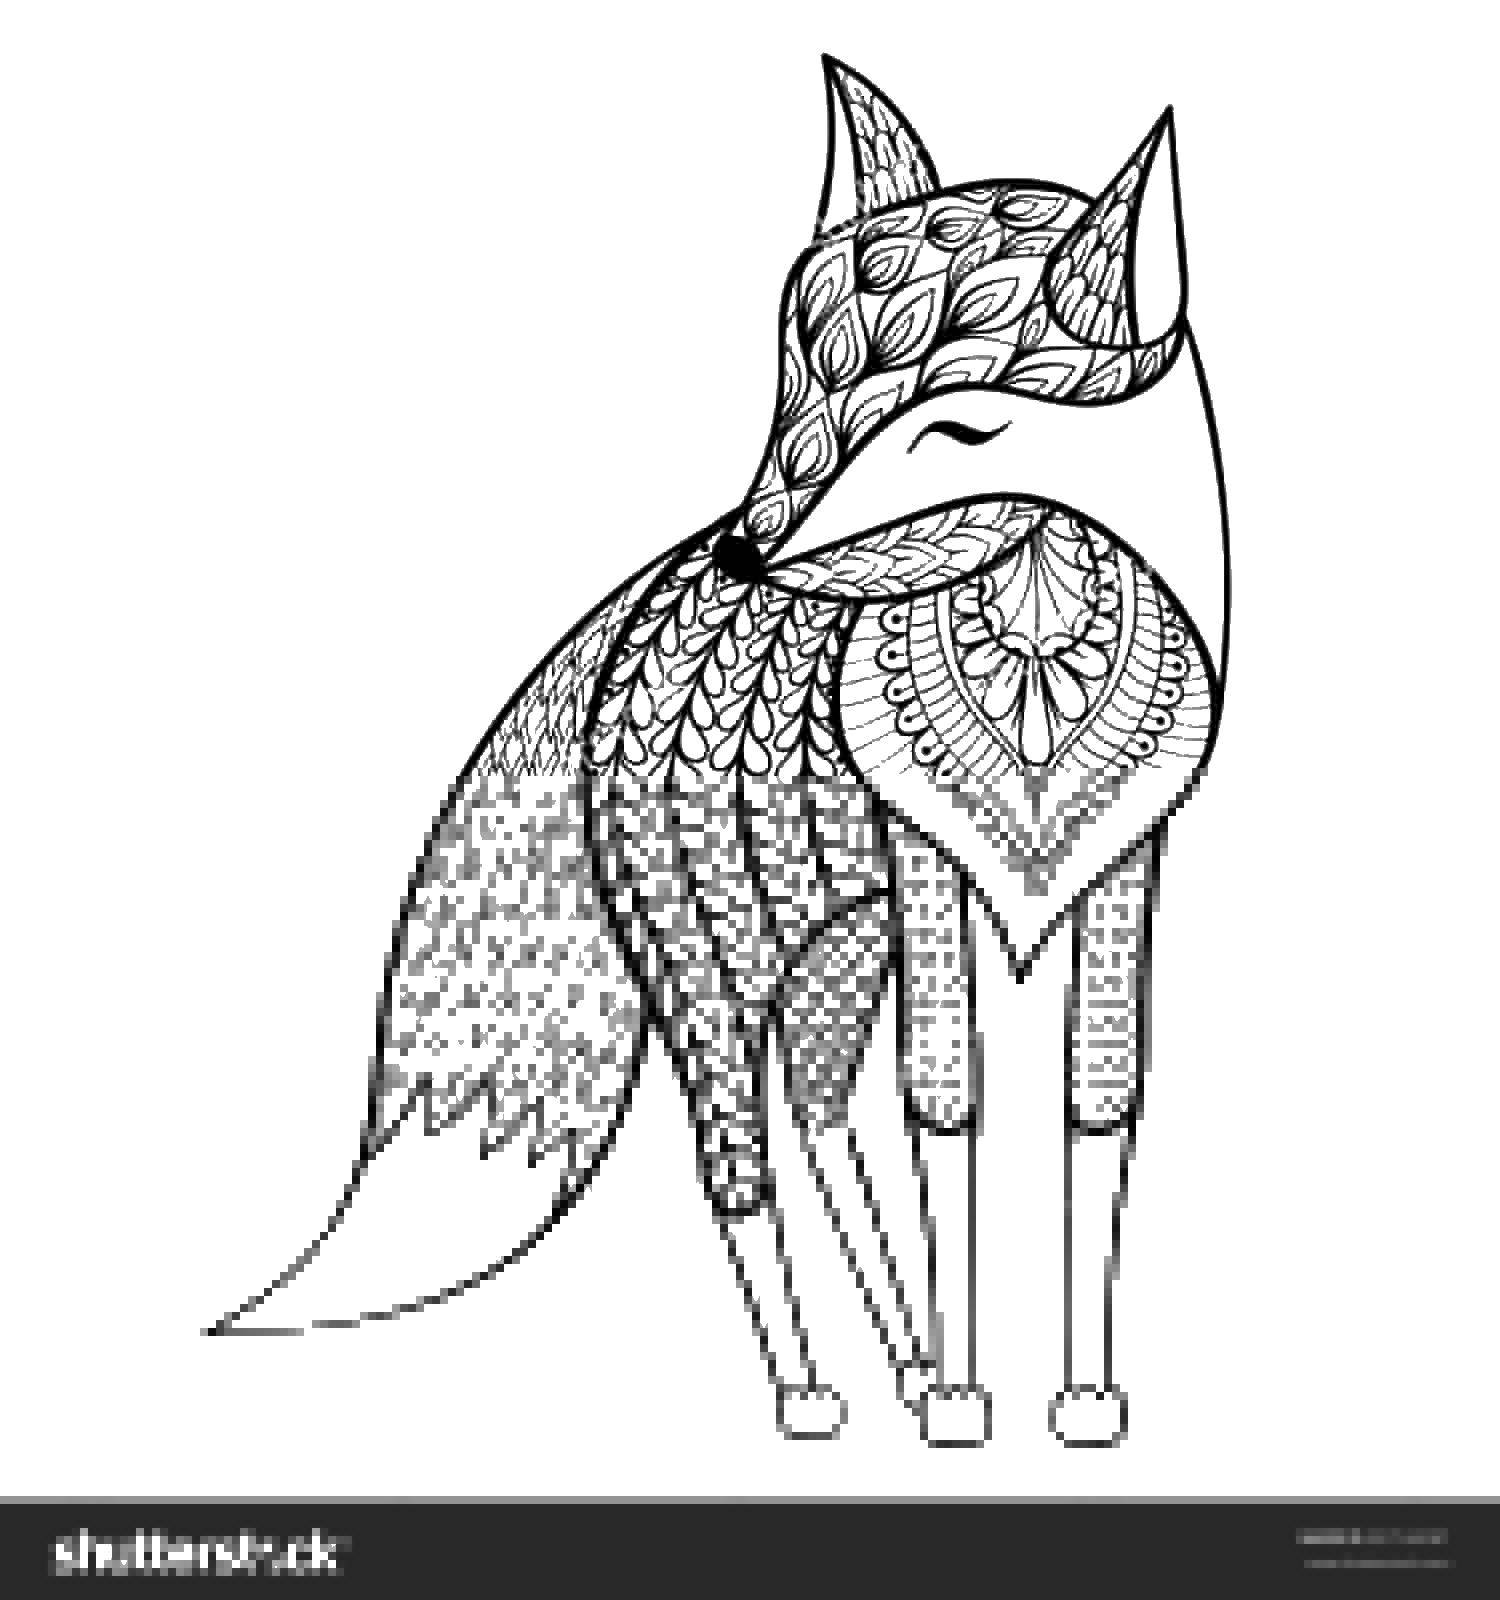 Coloring Fox in the patterns. Category Fox. Tags:  Fox, patterns, tail.